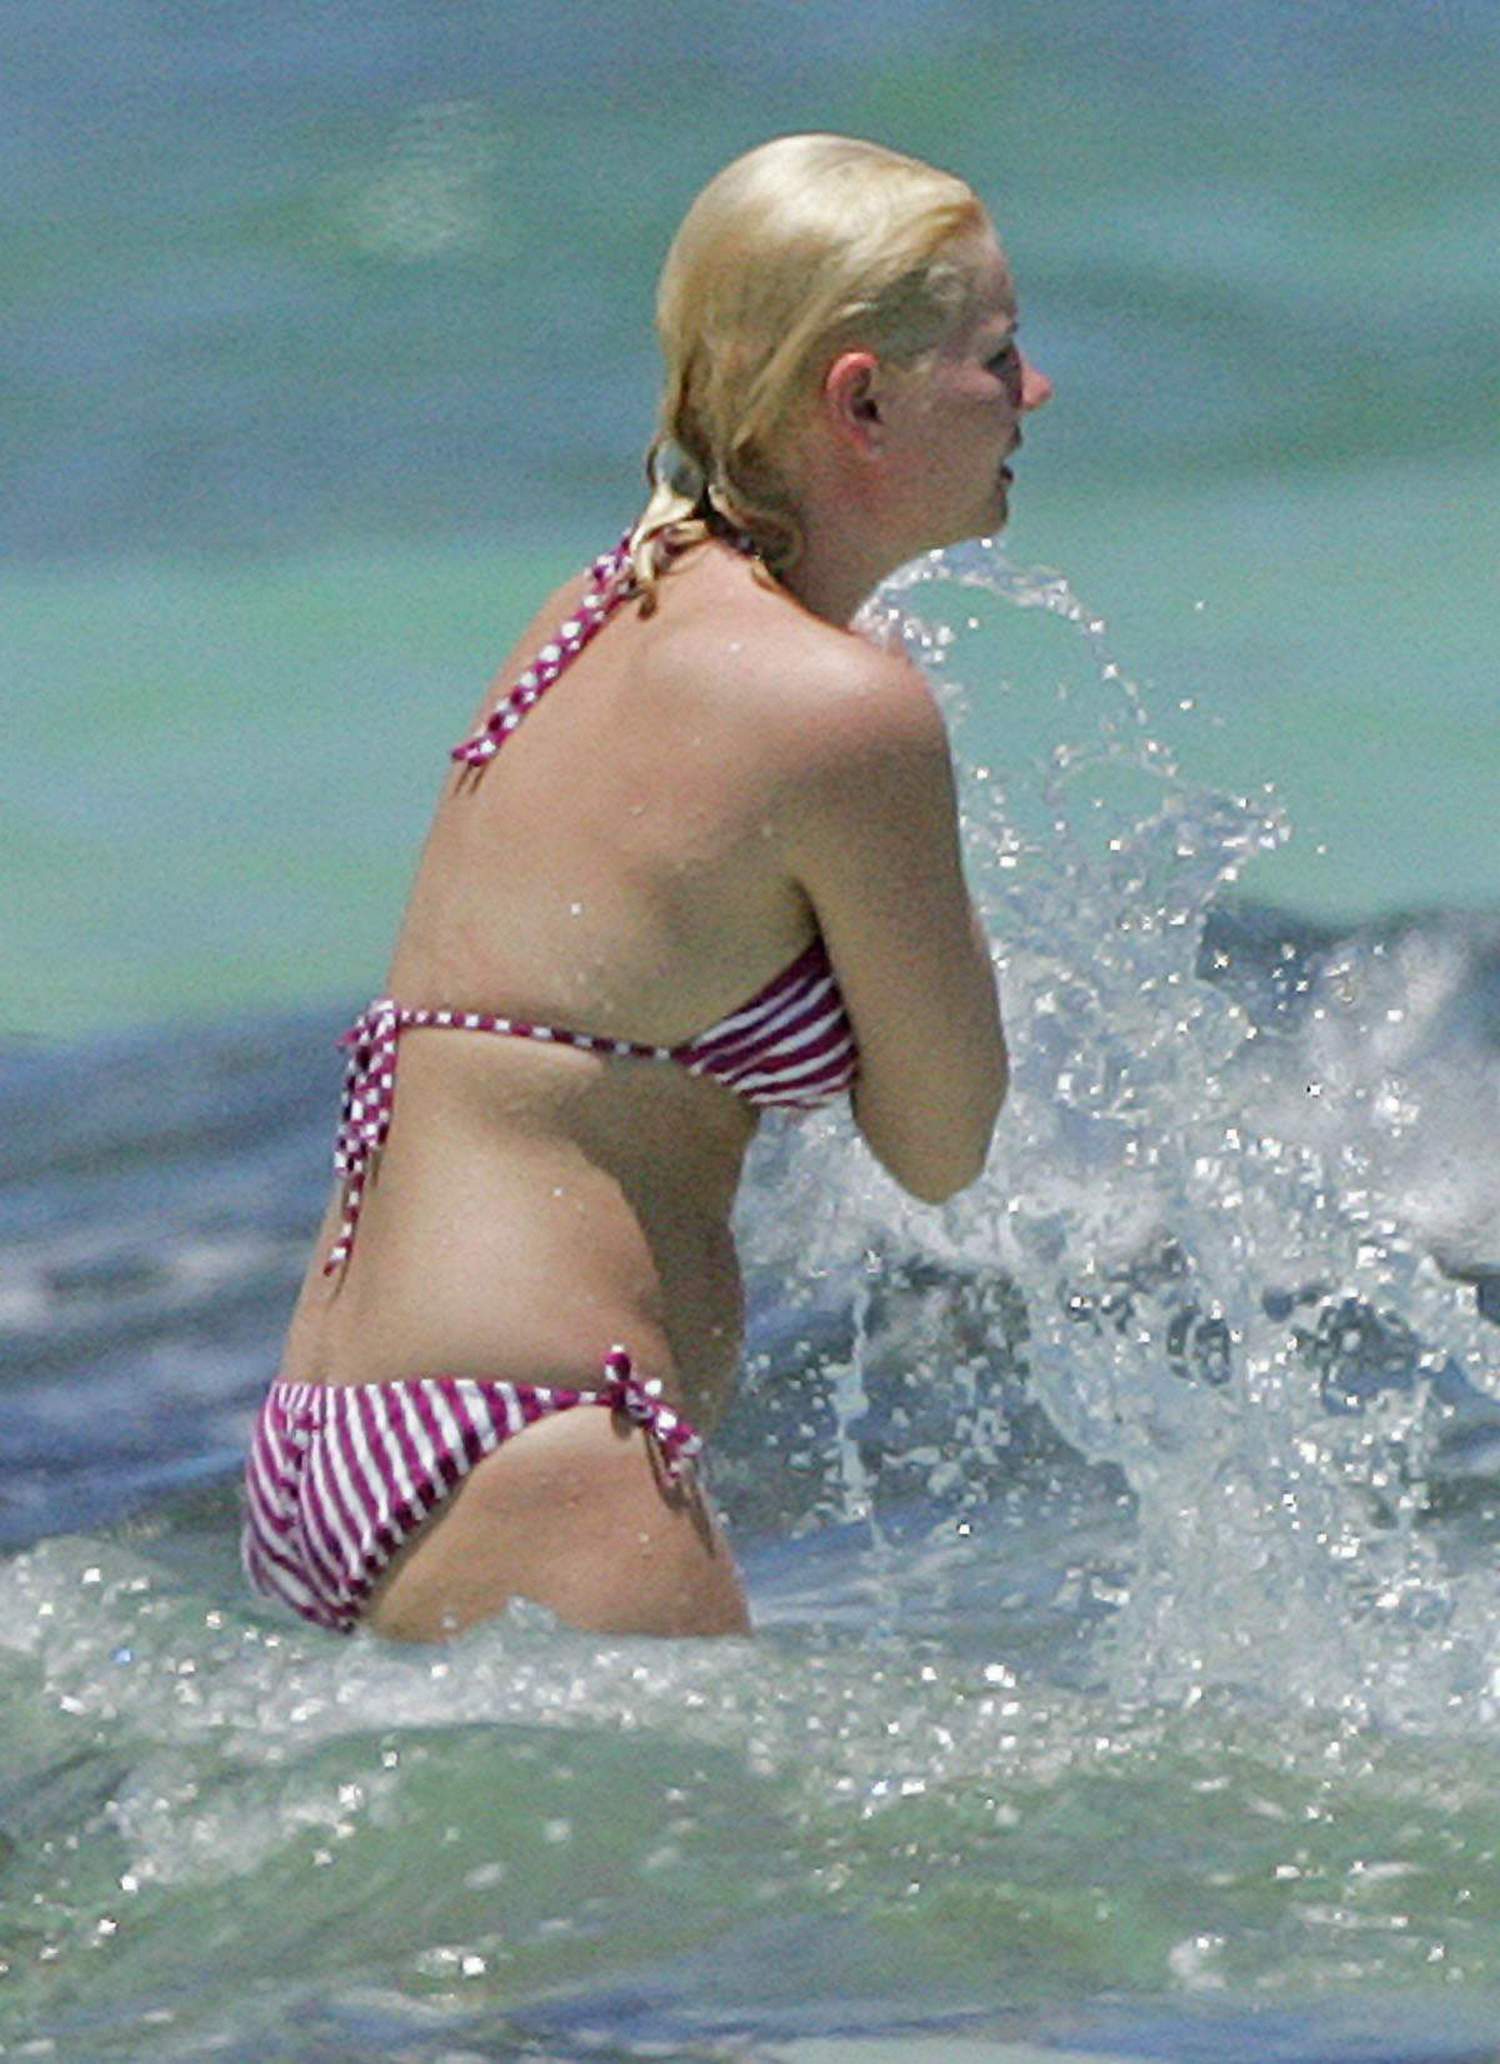 Elisha Cuthbert On the beach in Mexico May